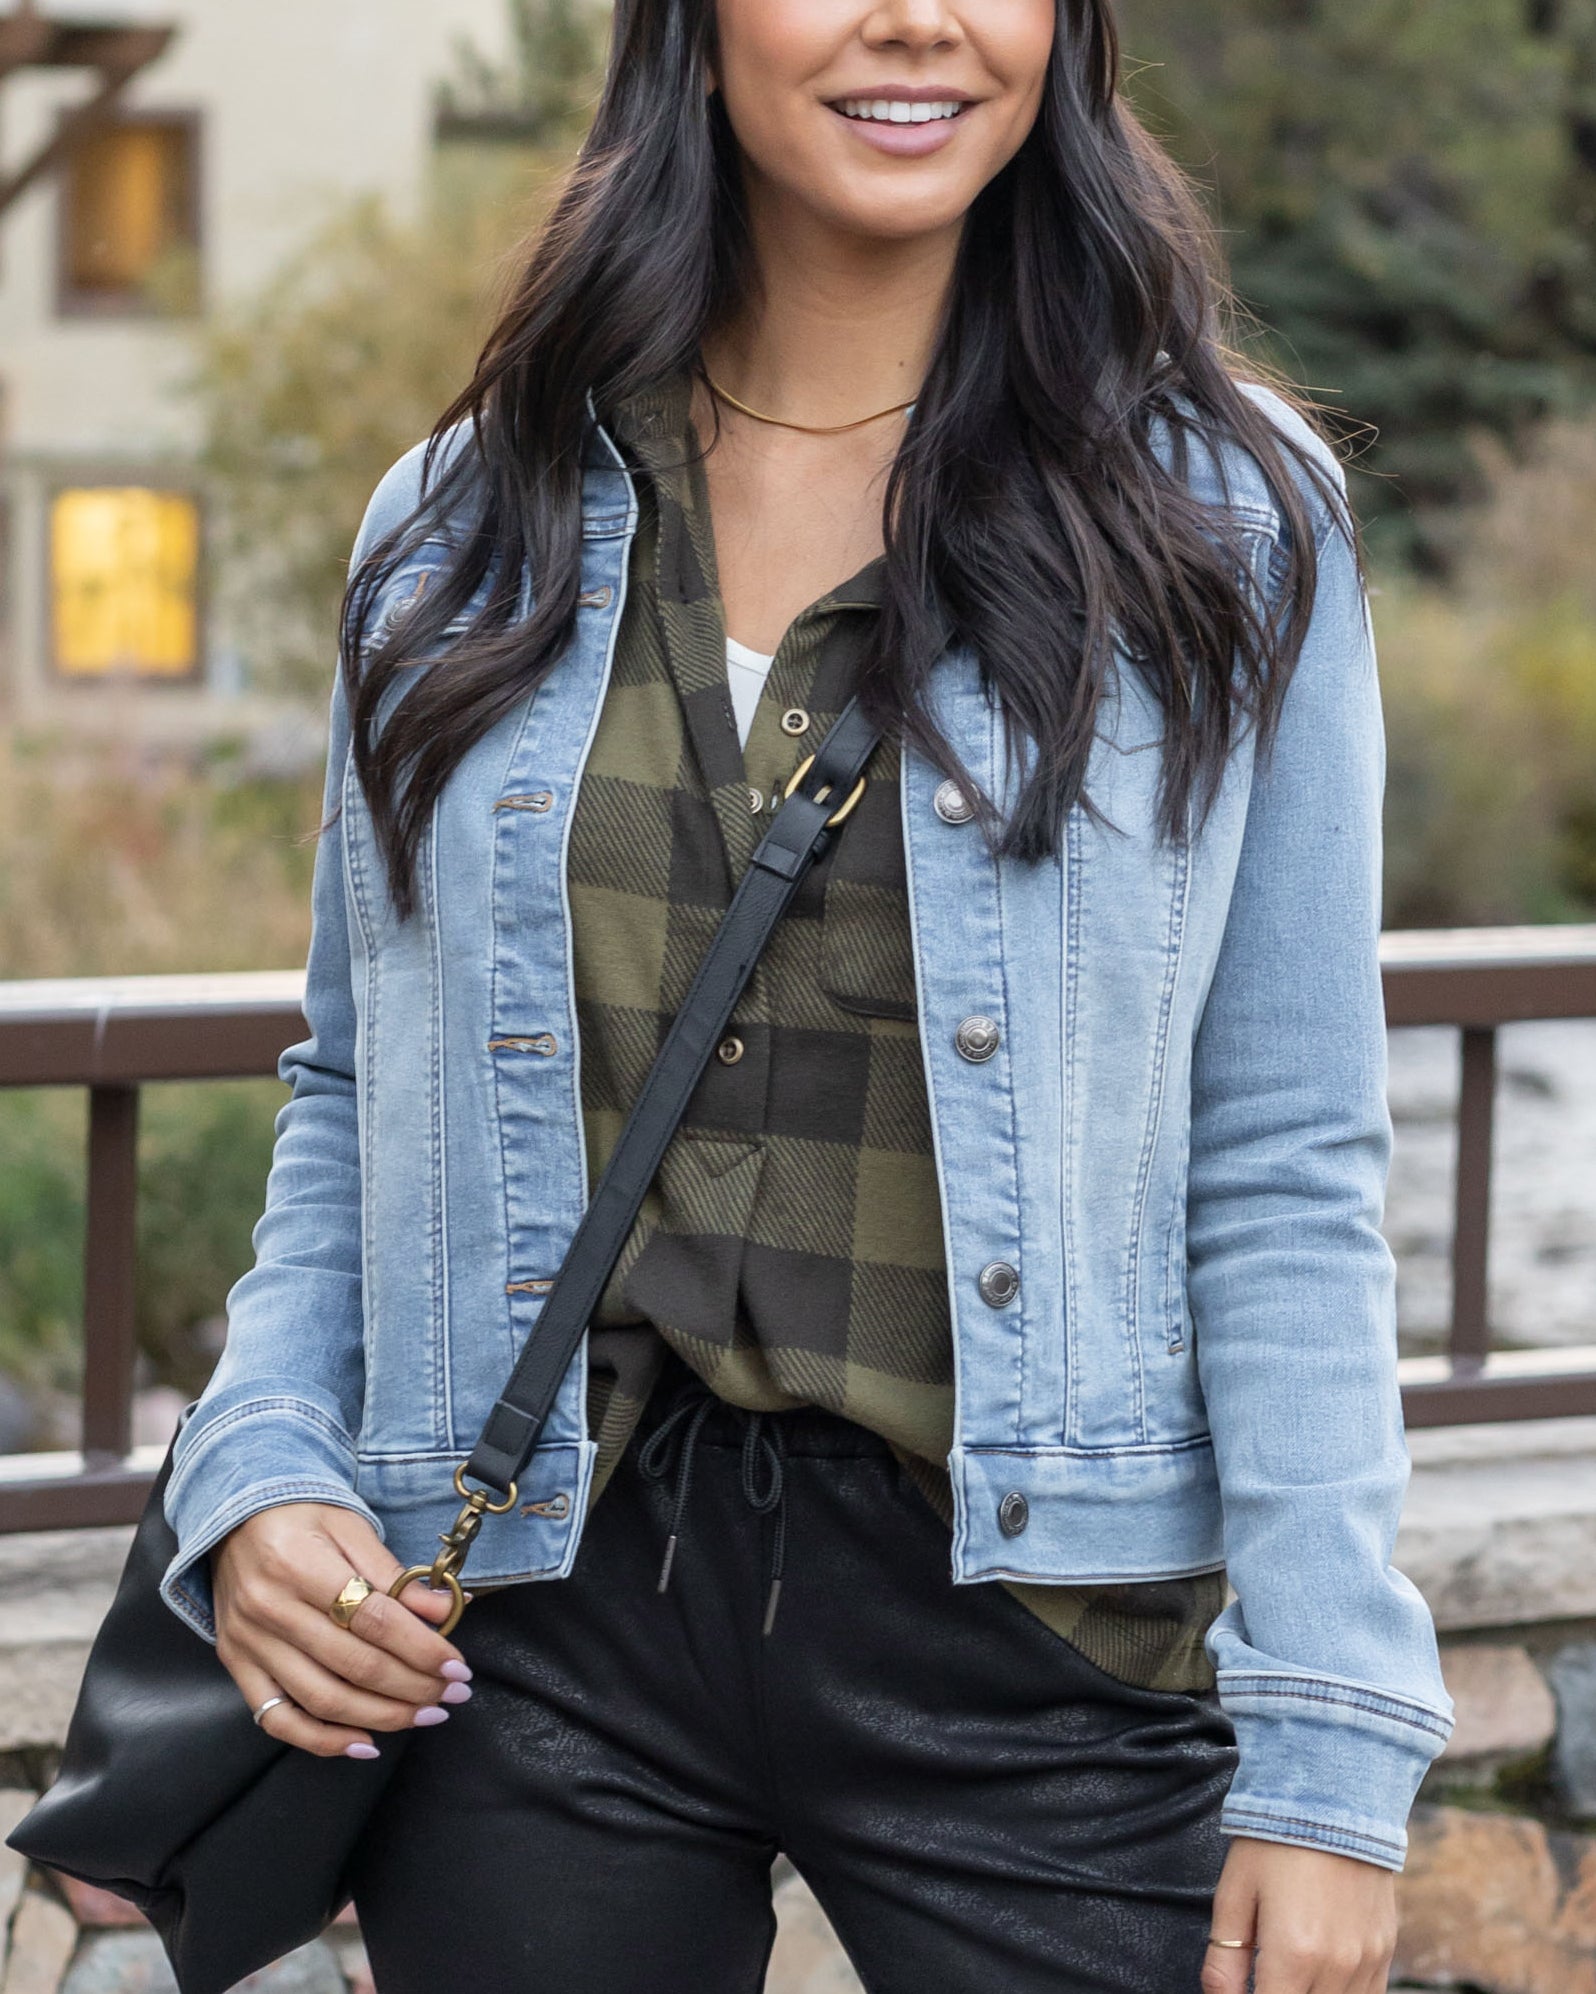 Jean jacket with white jeans on Stylevore